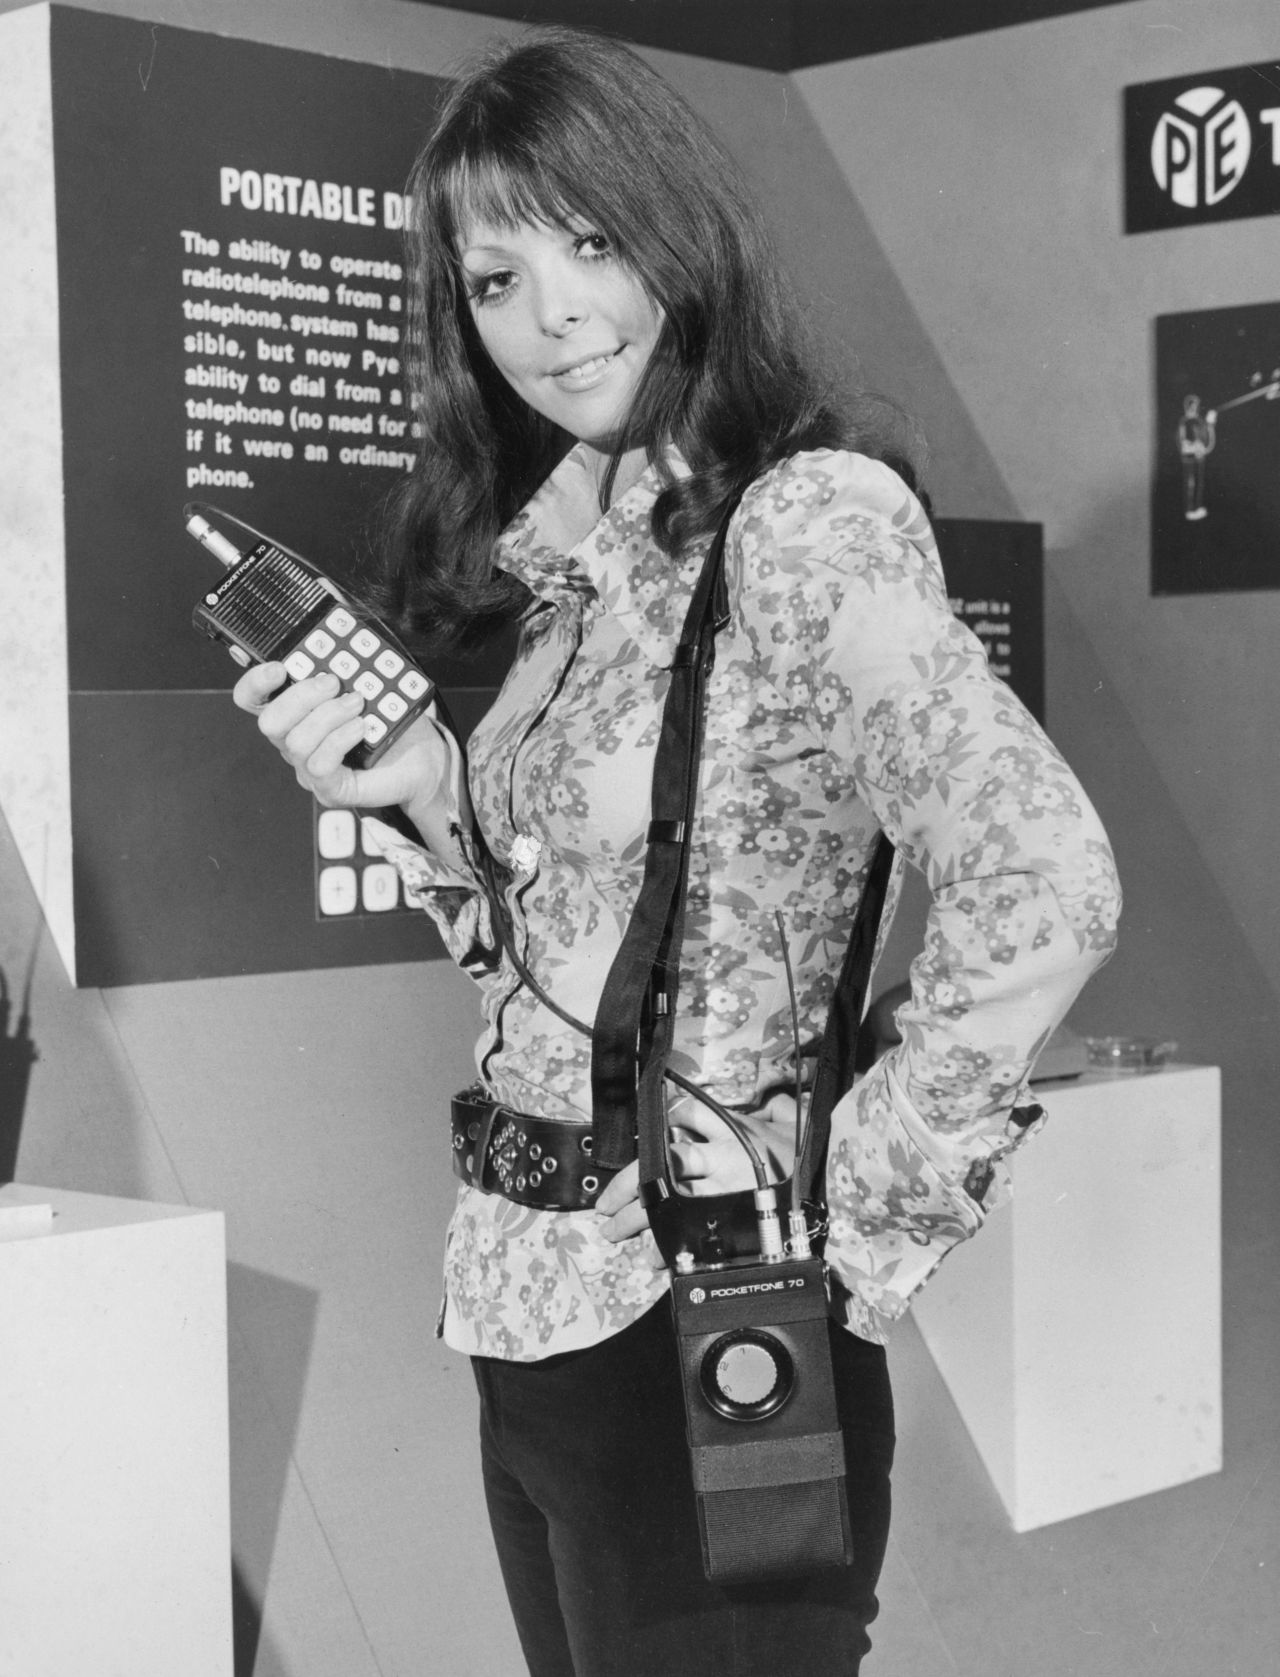 In this image from 1972, a model demonstrates a "portable radio-telephone" by Pye Telecommunications at a London exhibition called "Communications Today, Tomorrow and the Future."